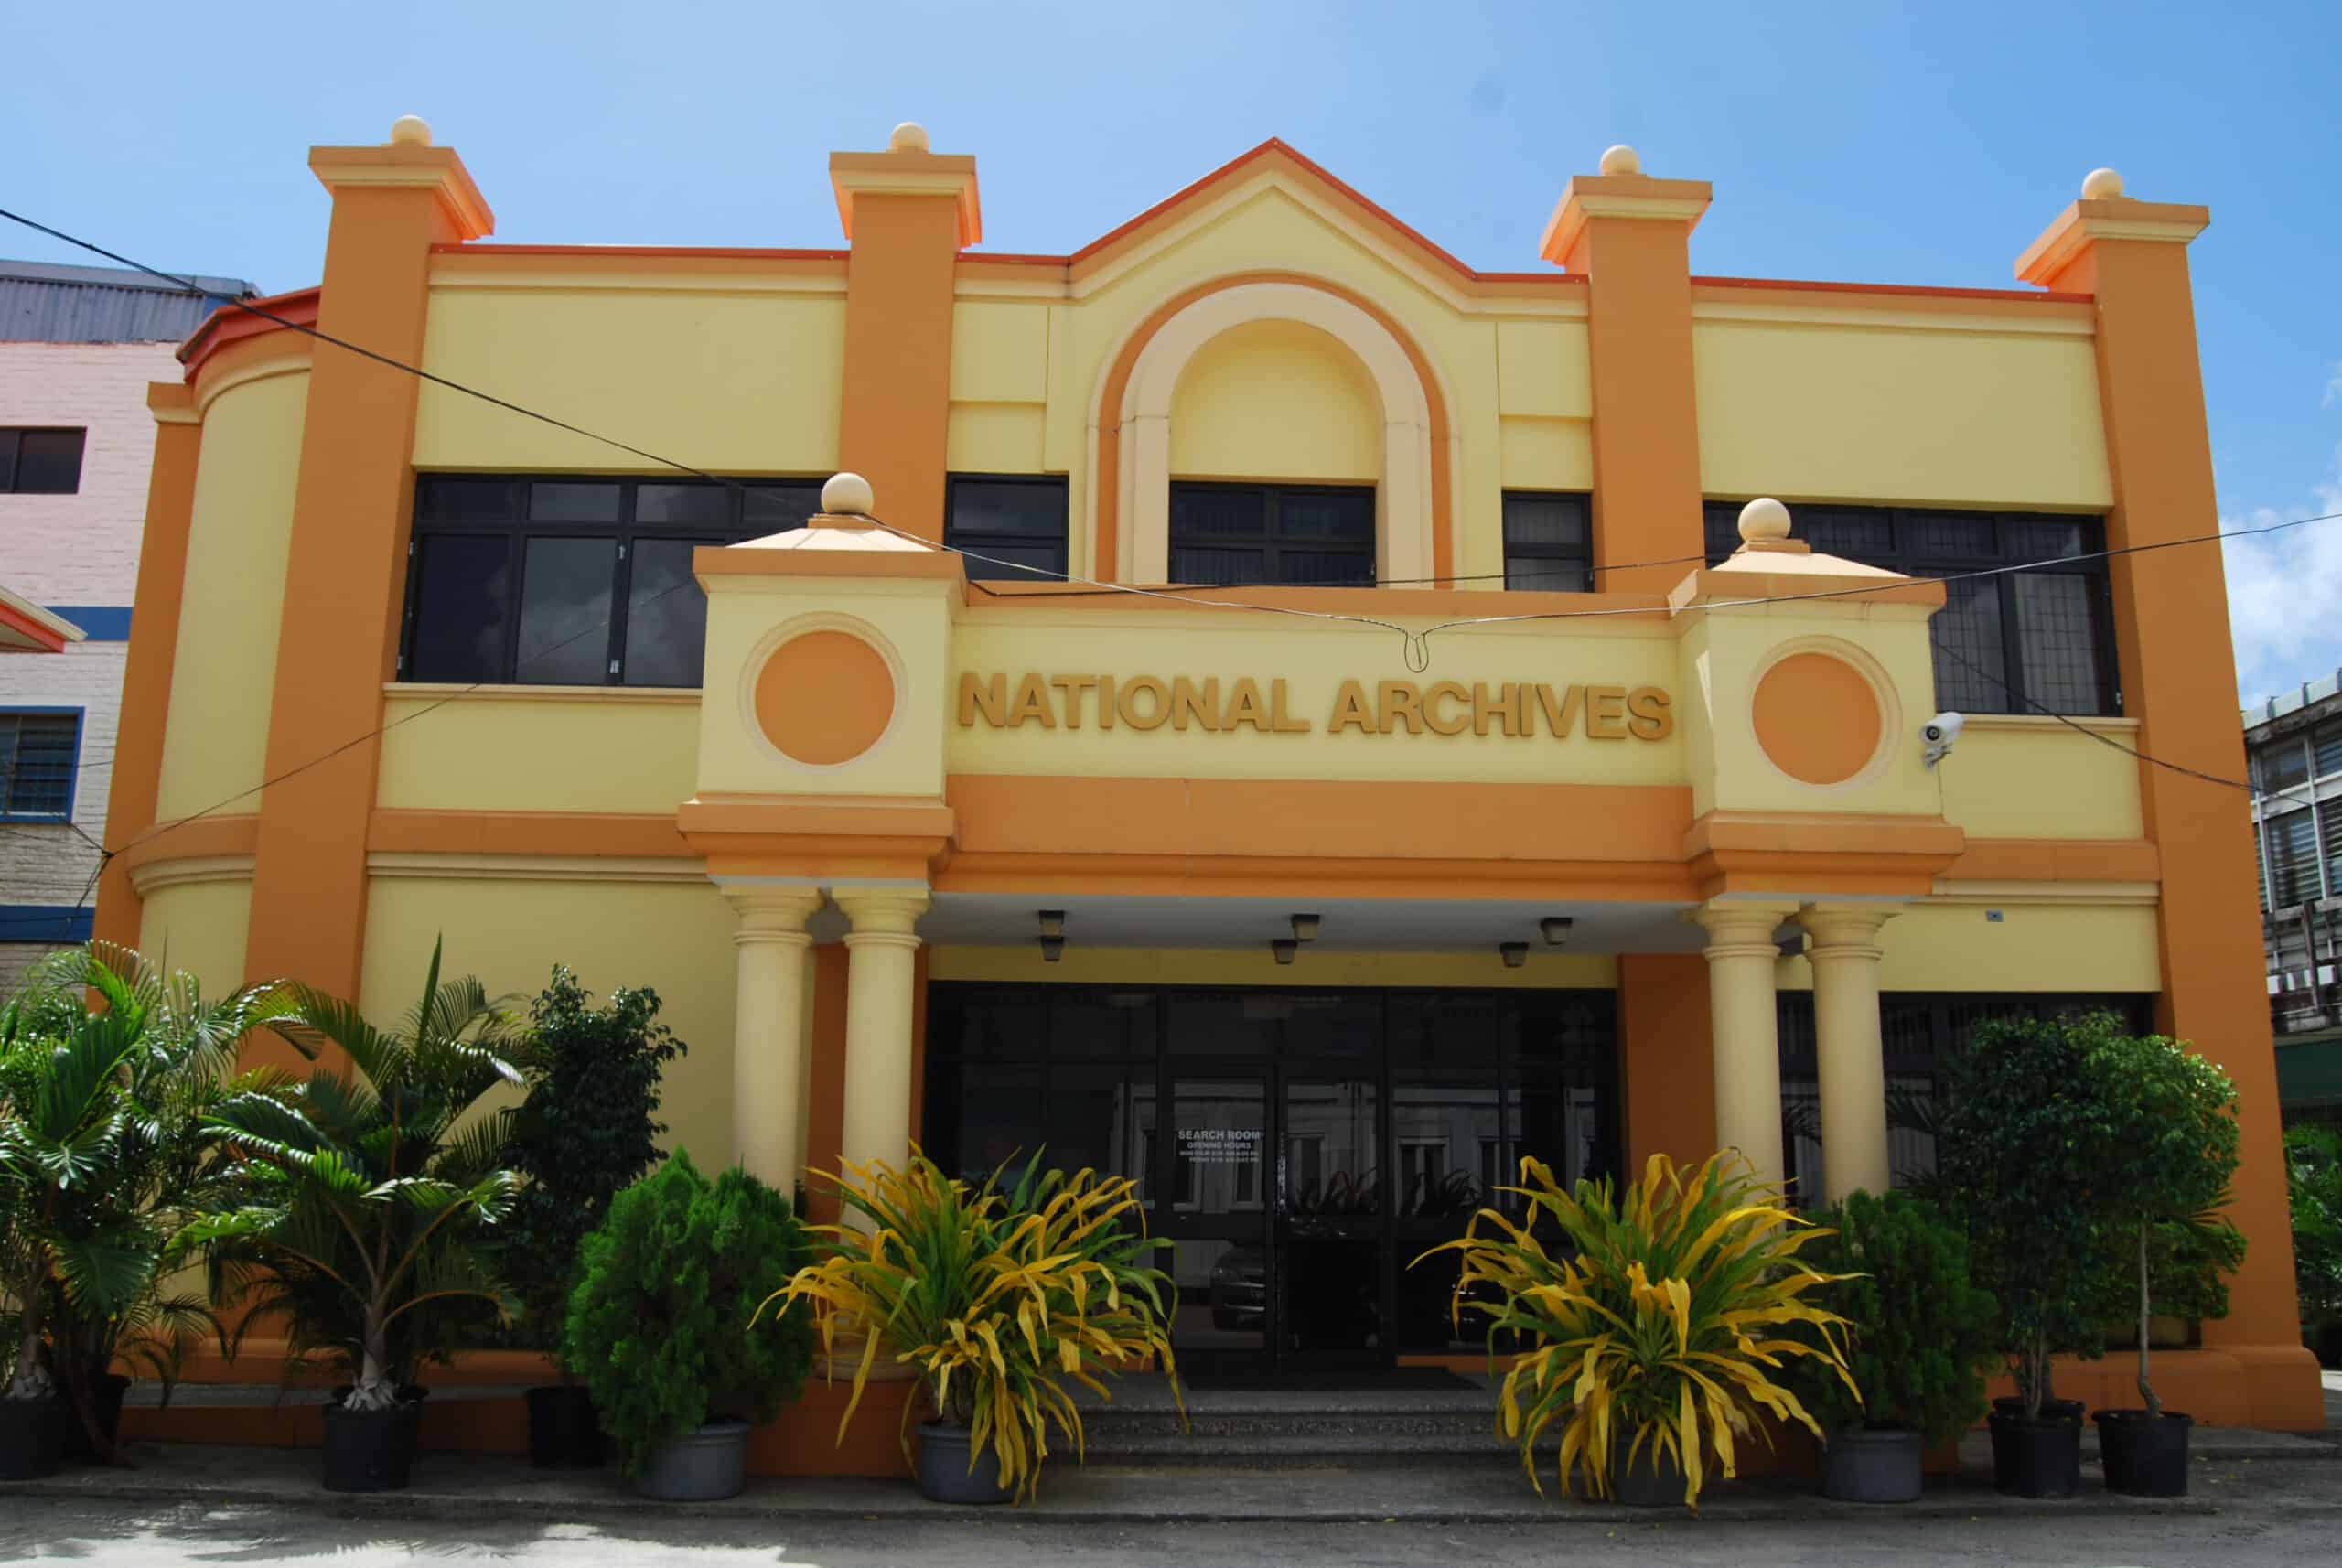 National archives of Trinidad and Tobago - National Archives of Trinidad and Tobago